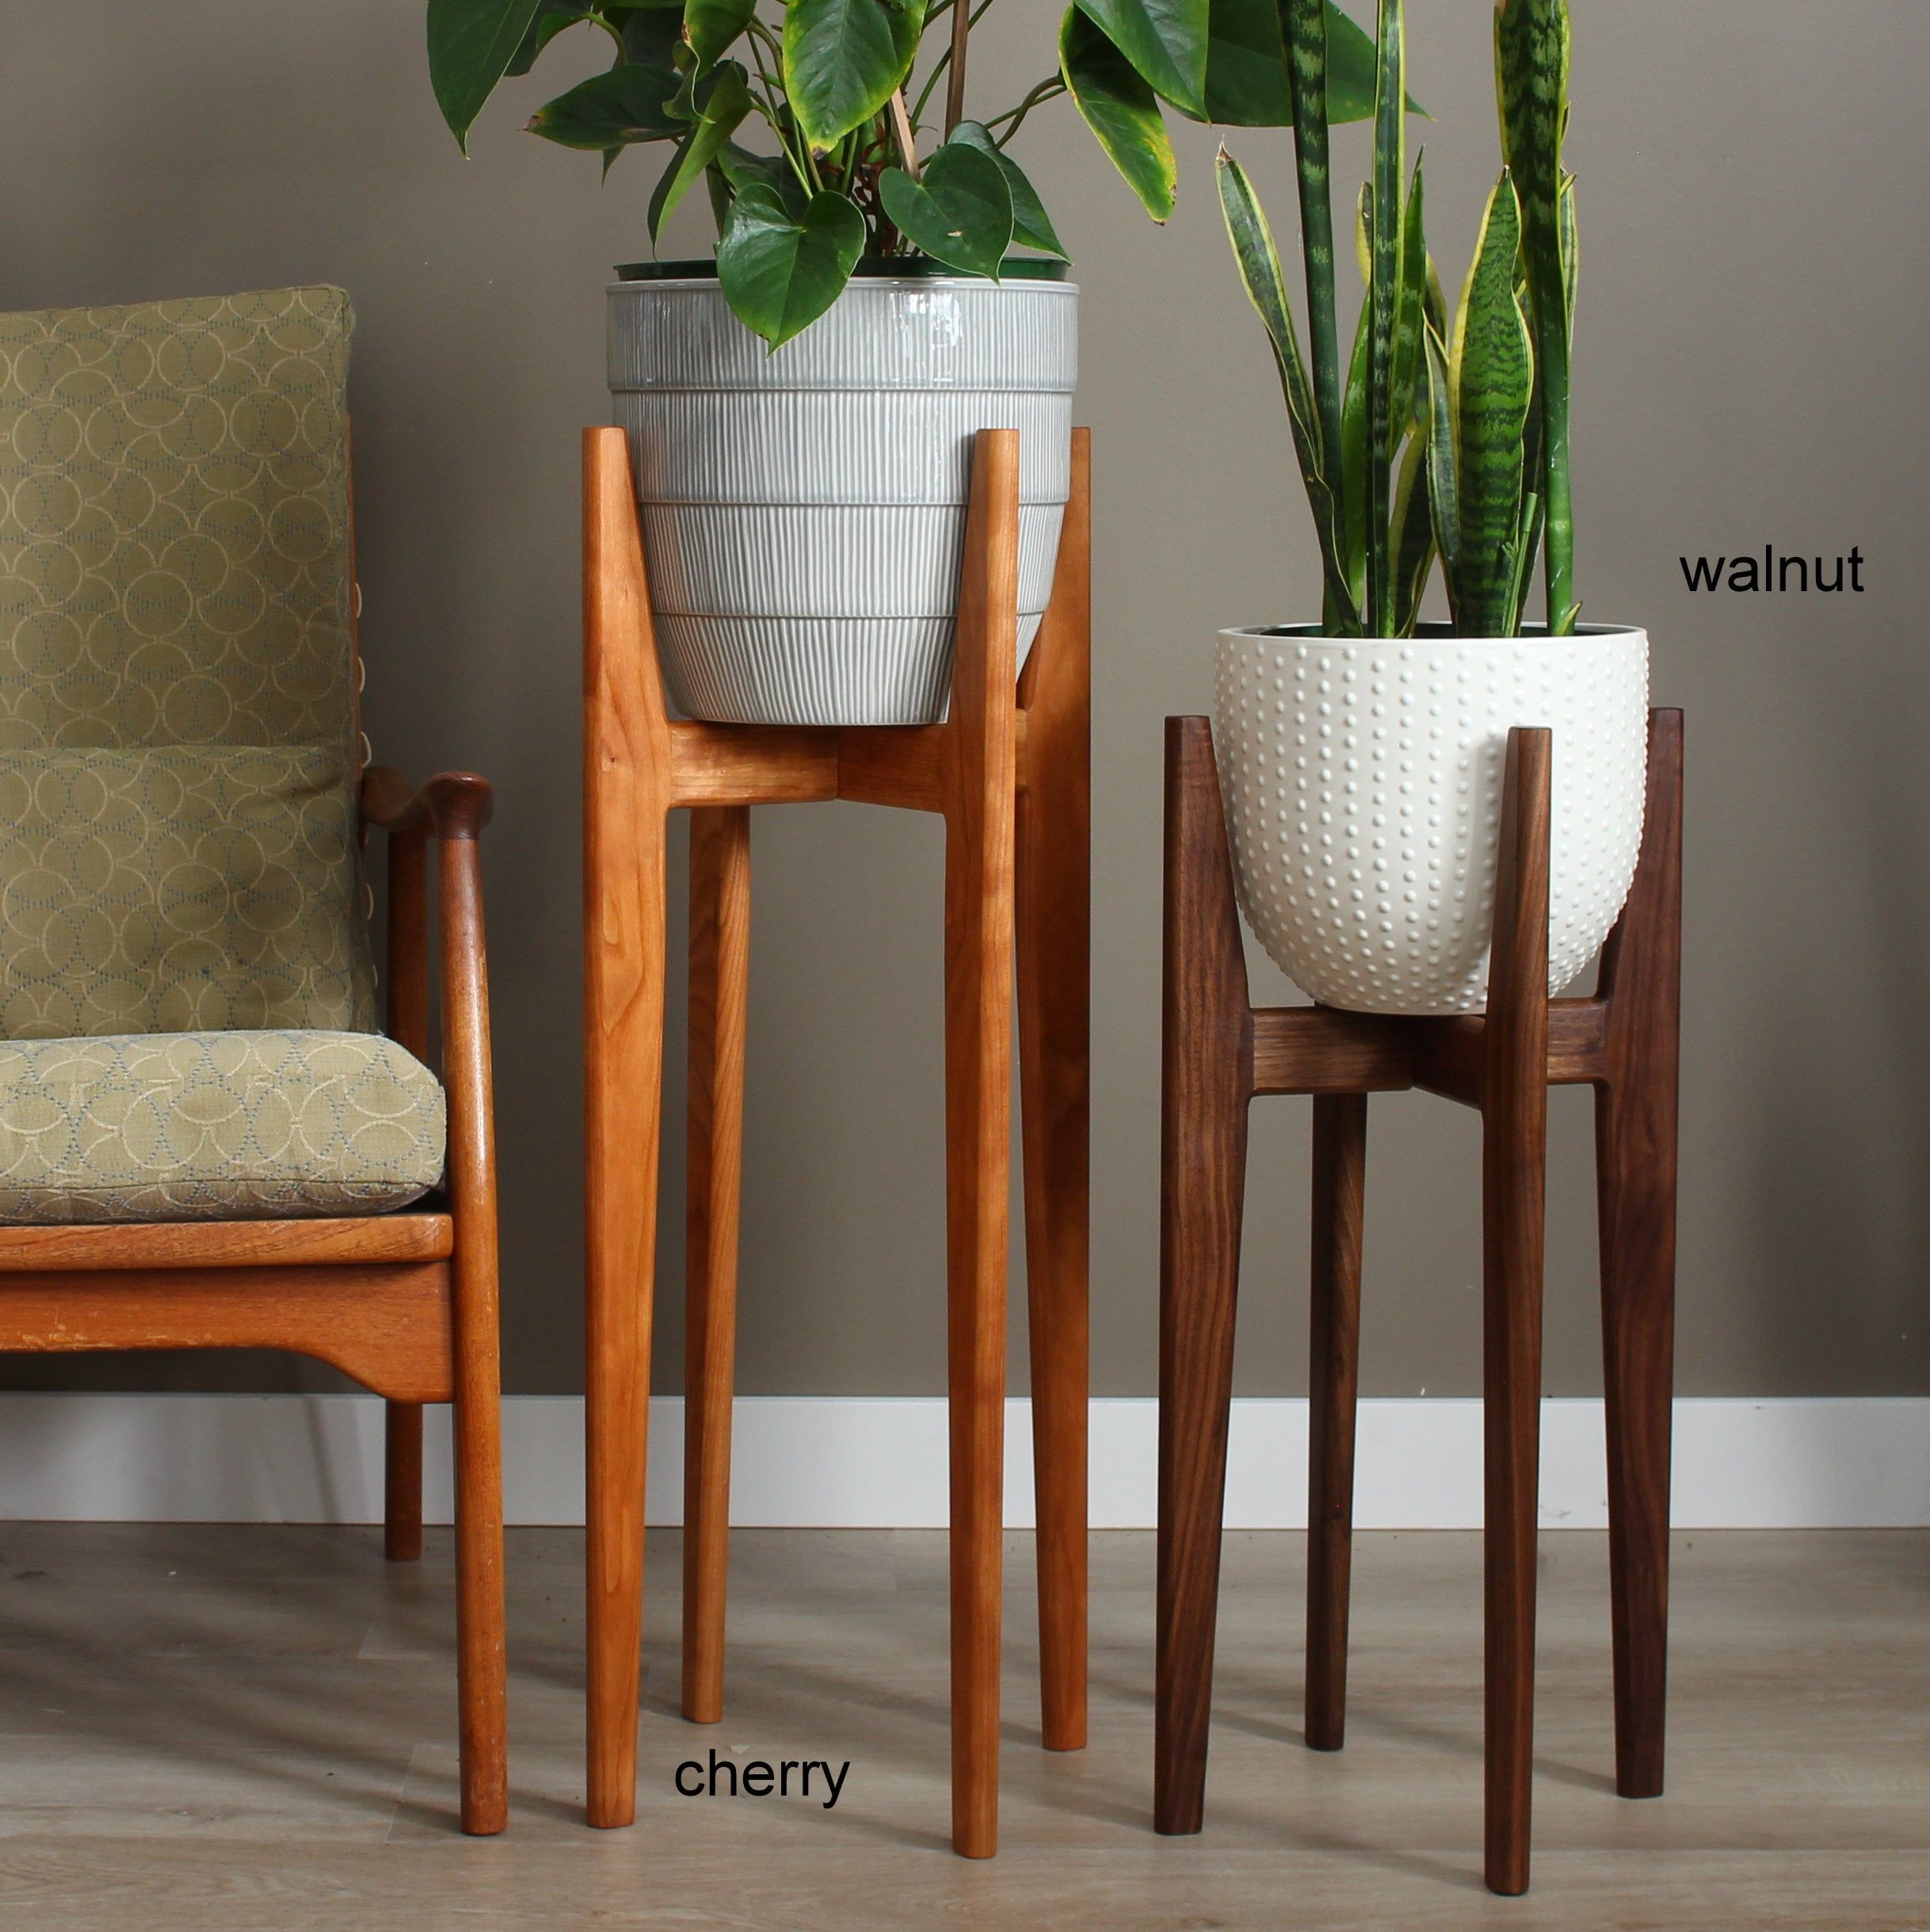 Mid Century Modern Plant Stand Our Original Design Indoor – Etsy In Wood Plant Stands (View 2 of 15)